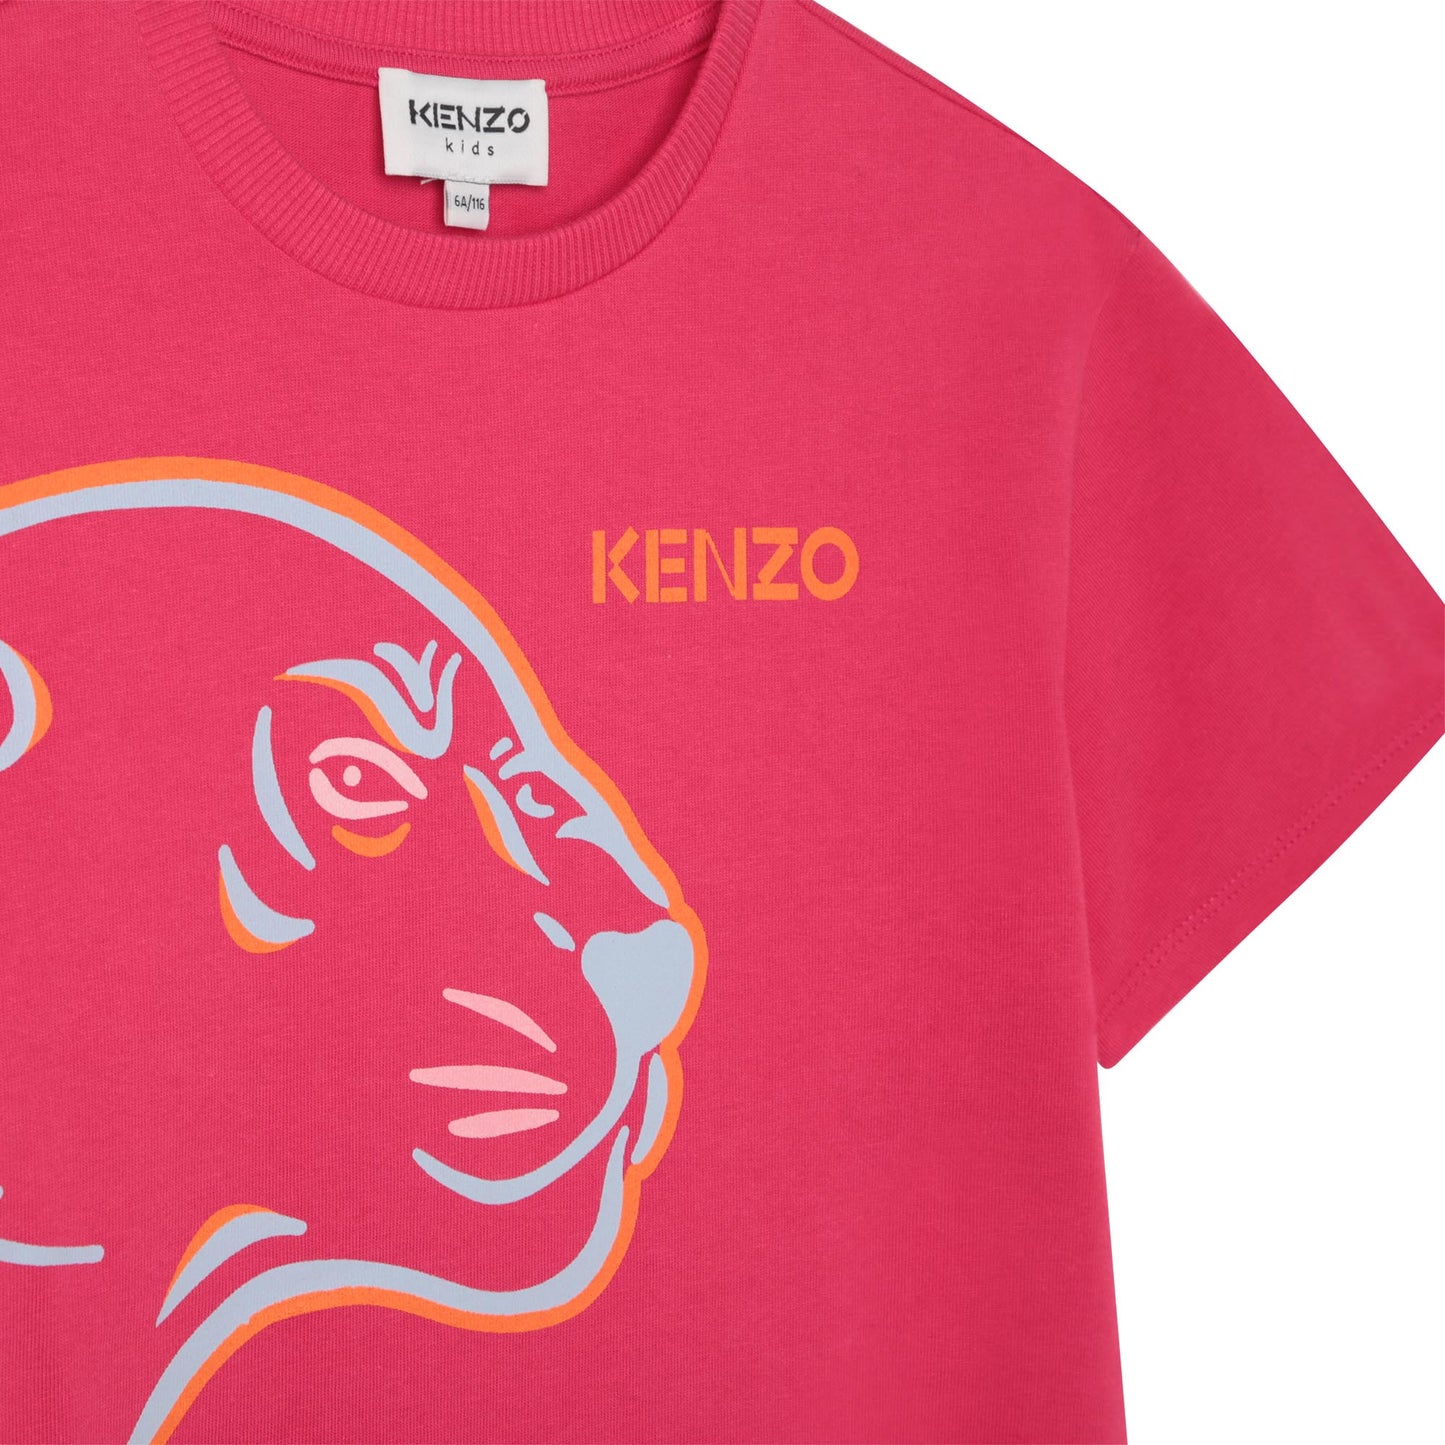 Kenzo Short Sleeved Dress w/ Front Panther Graphic